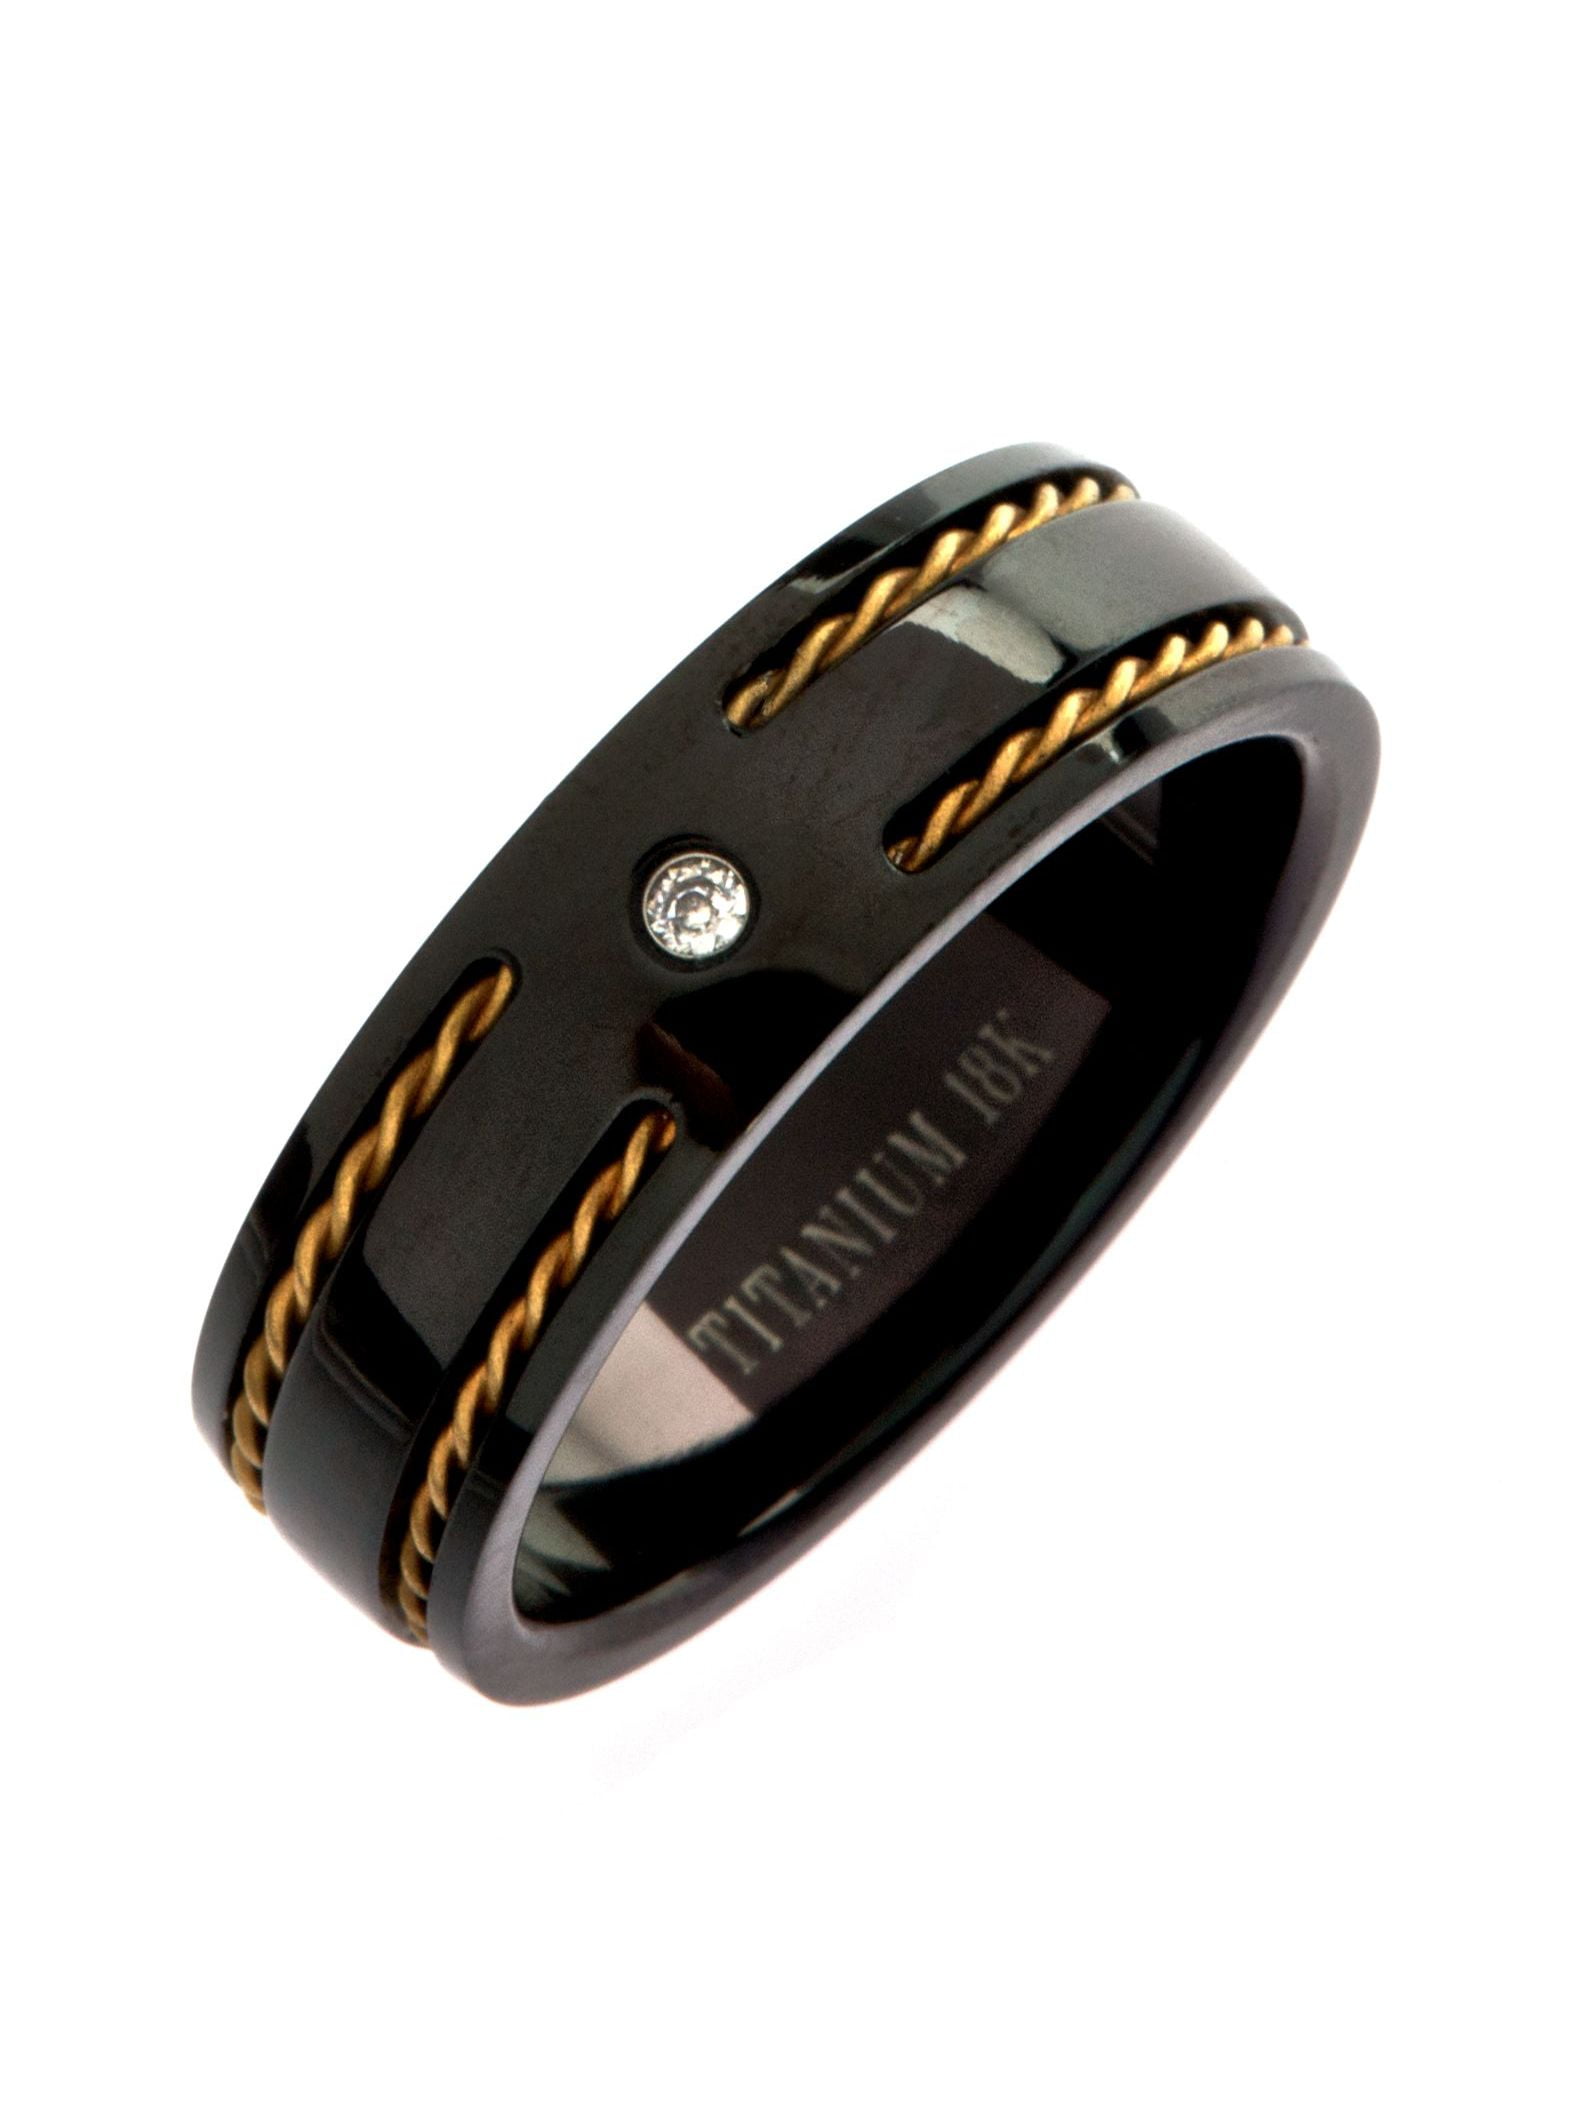 7mm Black Titanium Wedding Band With 2 Cable Embedded In Grooves 2mm CZ. Ring